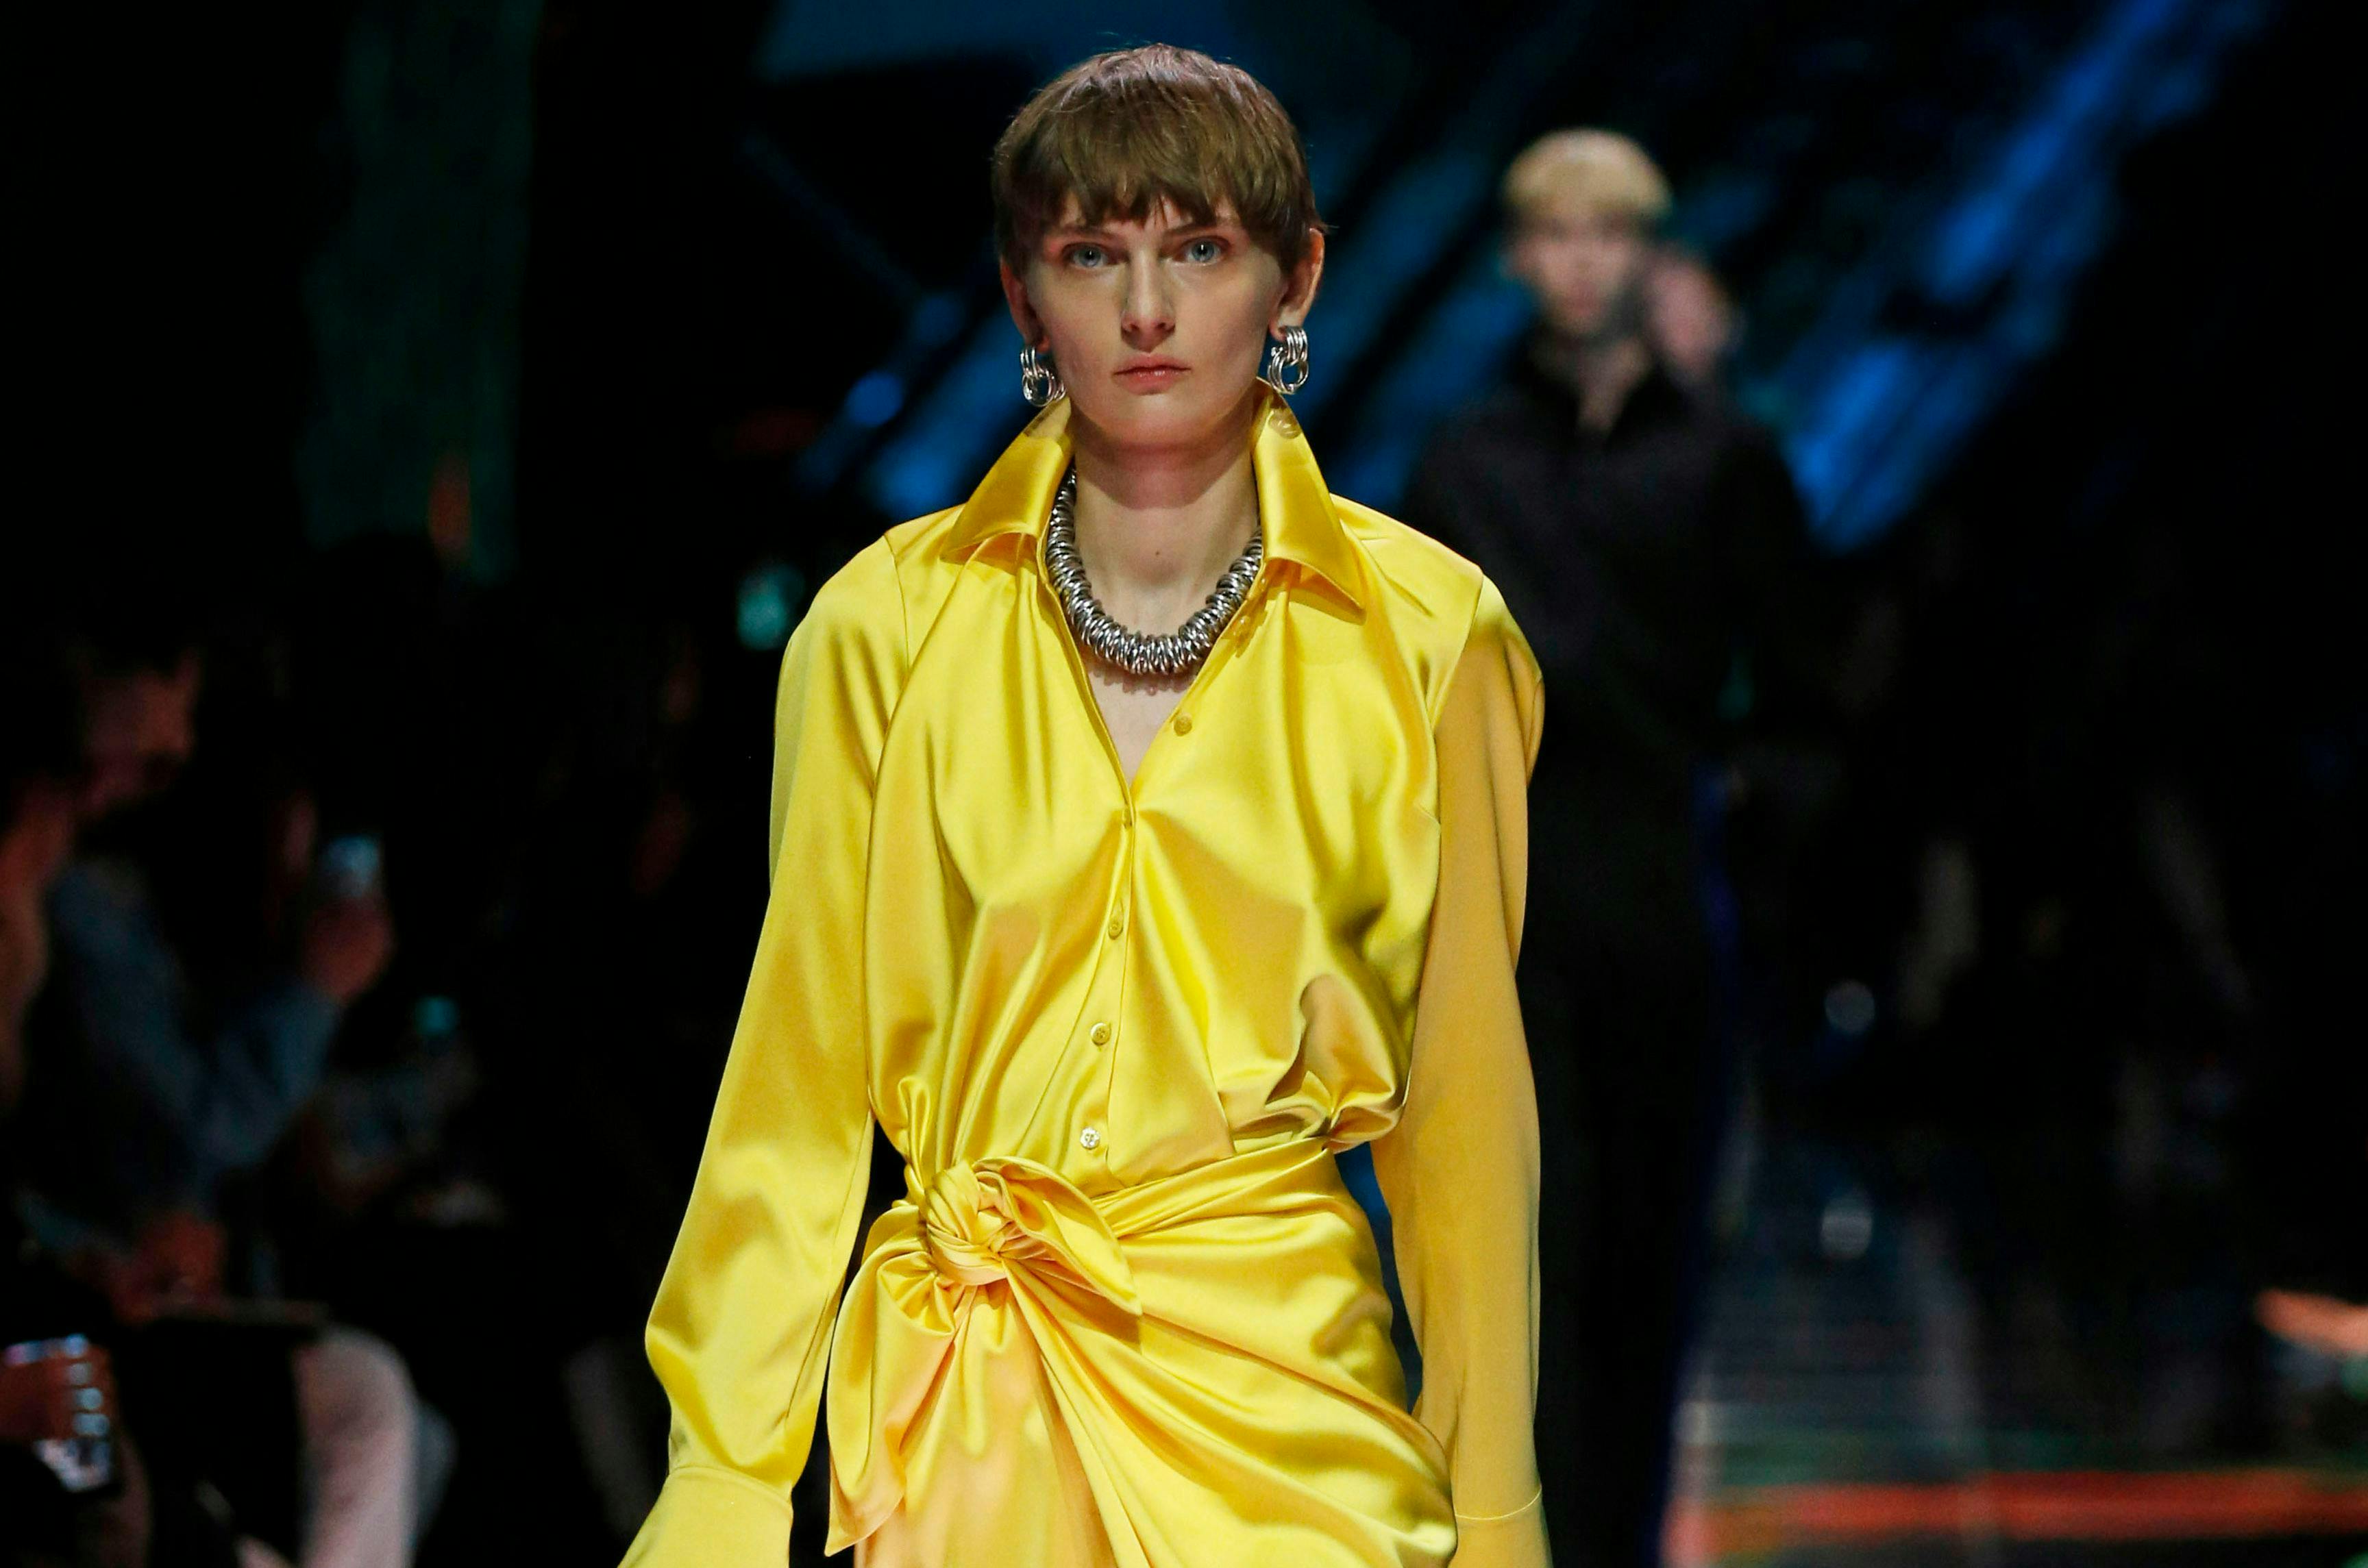 balenciaga ready to wear spring summer 2019 _paris fashion week september 2018 person human fashion clothing apparel necklace accessories jewelry accessory